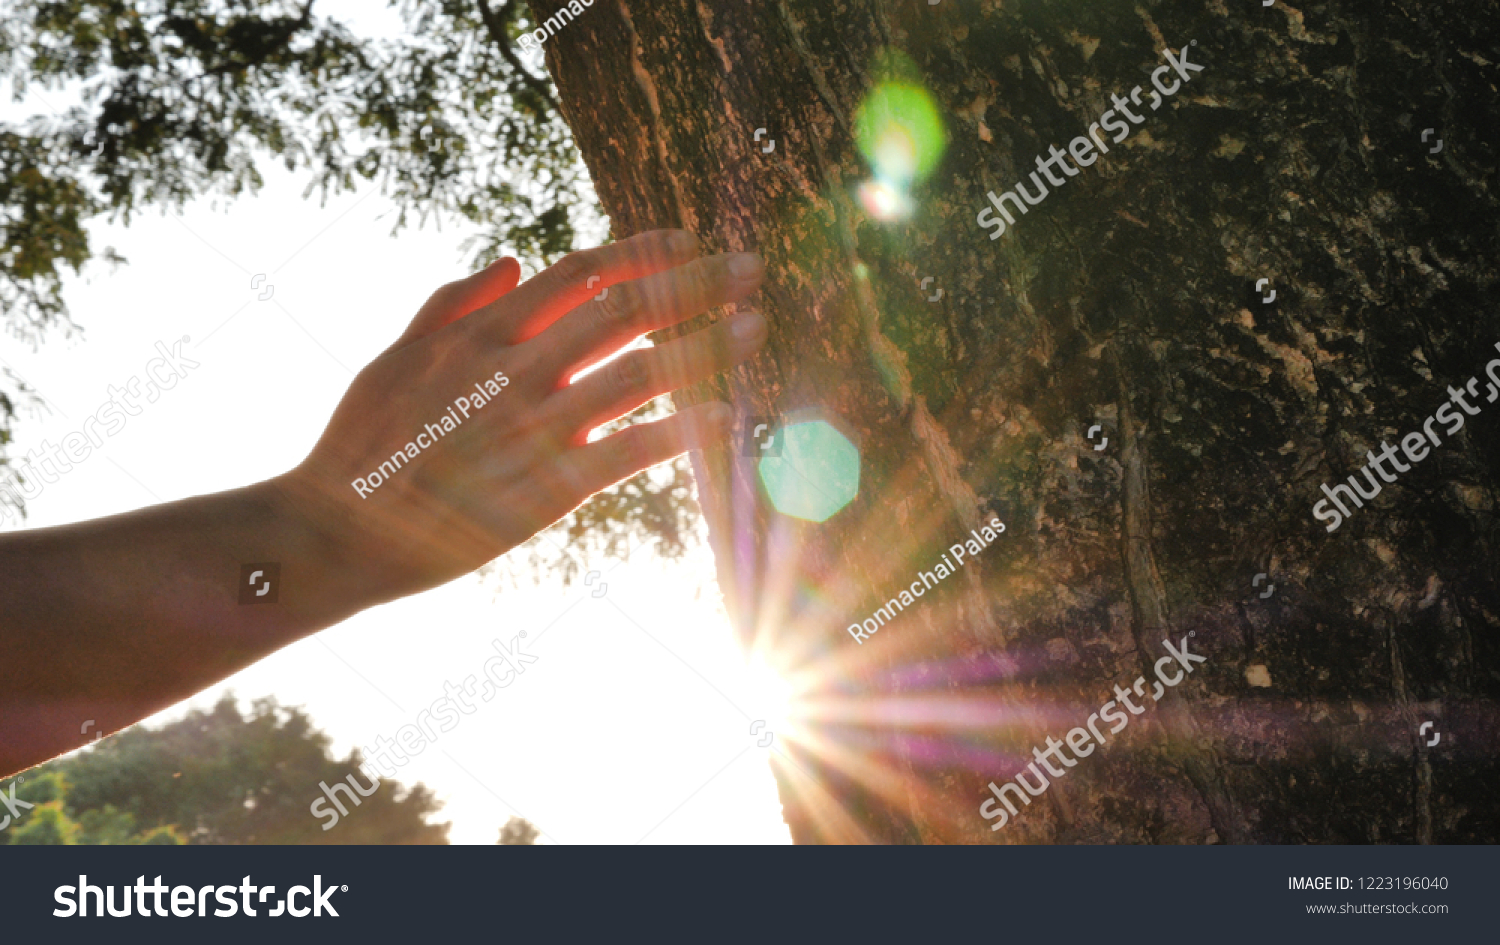 stock-photo-closeup-hand-touching-a-tree-trunk-in-the-forest-human-is-caring-about-nature-and-environment-1223196040.jpg